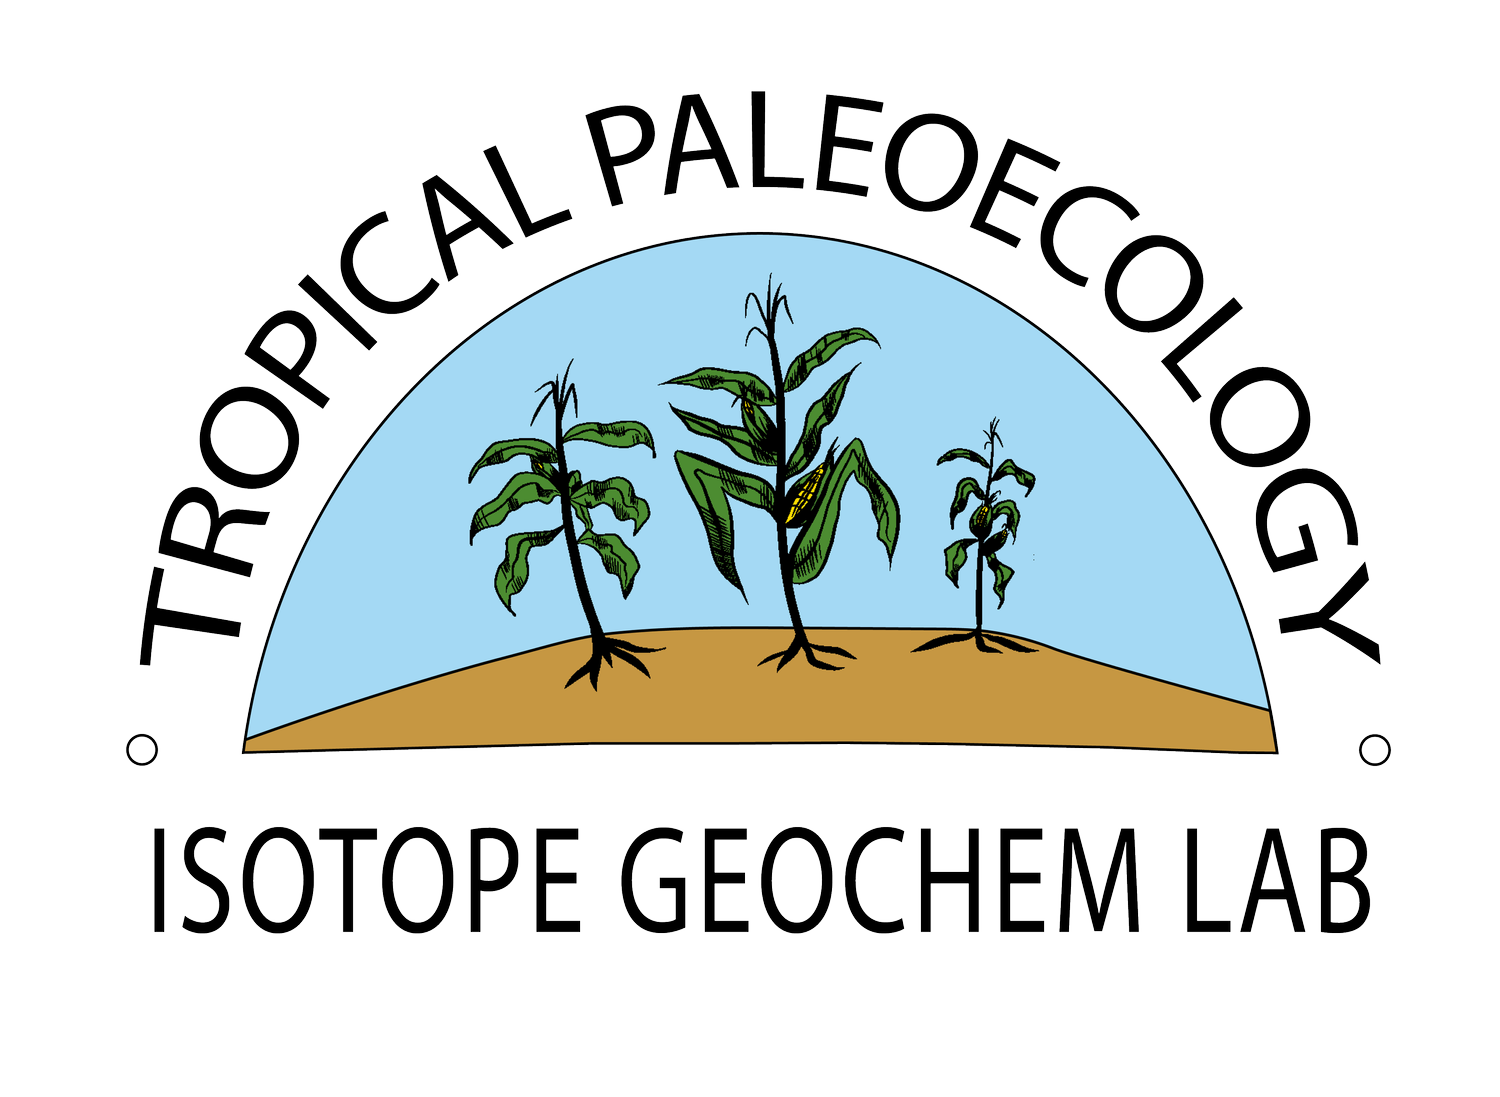 Tropical Paleoecology and Isotope Geochemistry Lab